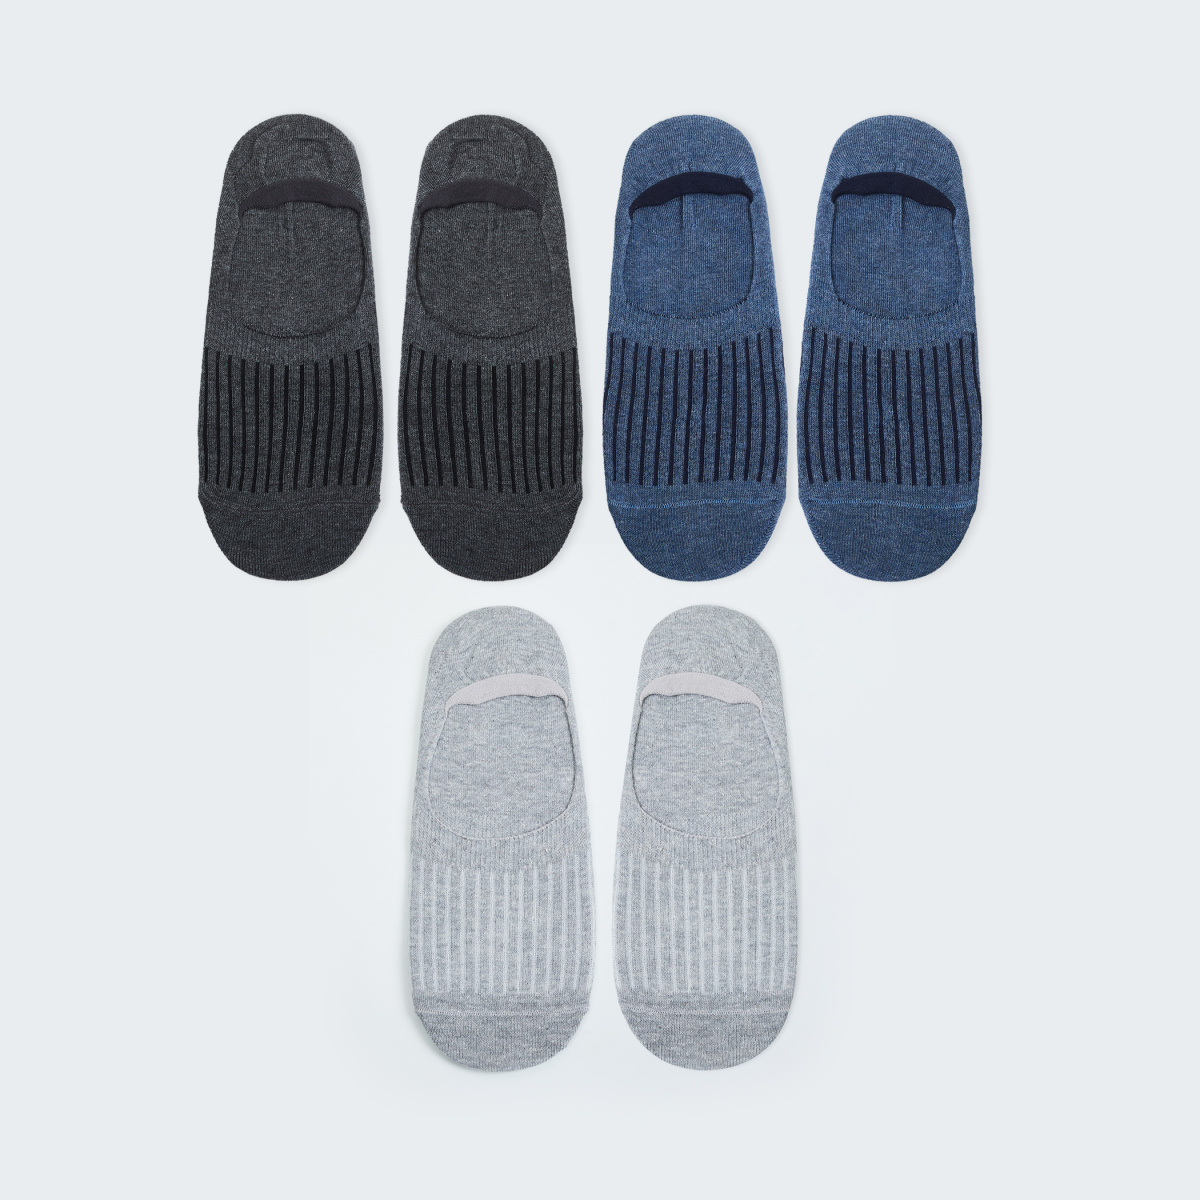 MAX Patterned Knit Socks - Pack of 3